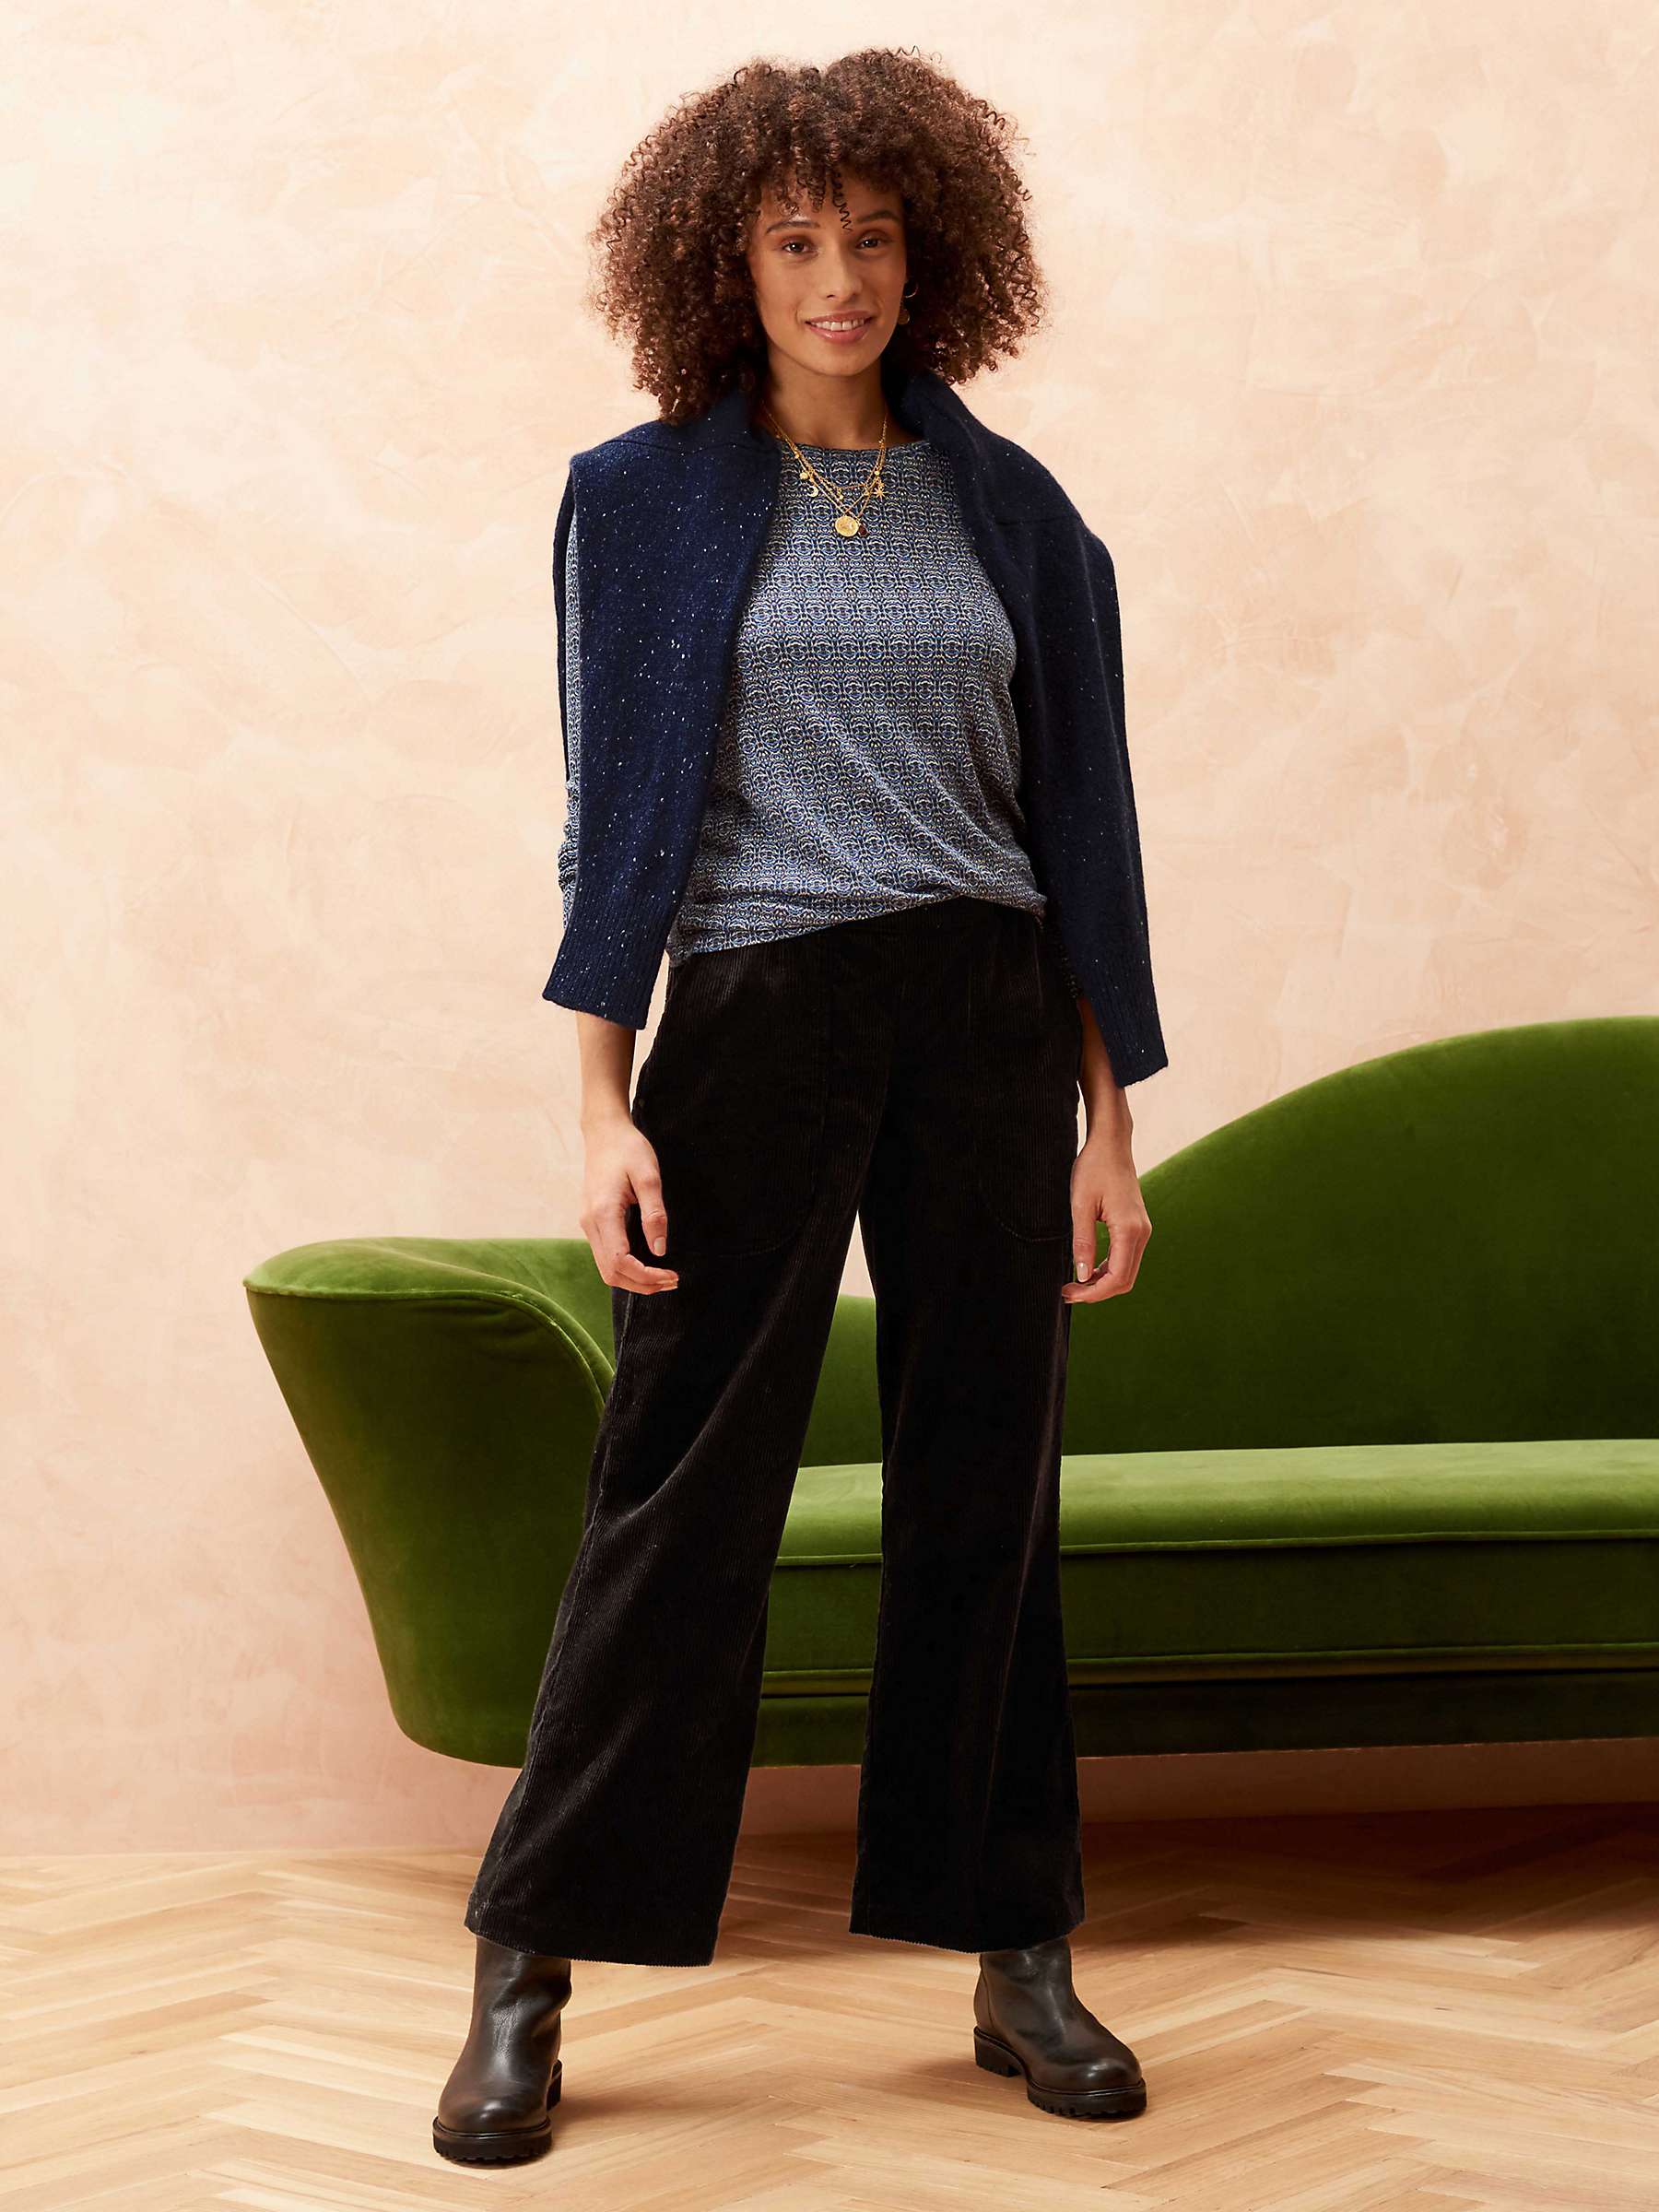 Buy Brora Corduroy Pull On Trousers Online at johnlewis.com